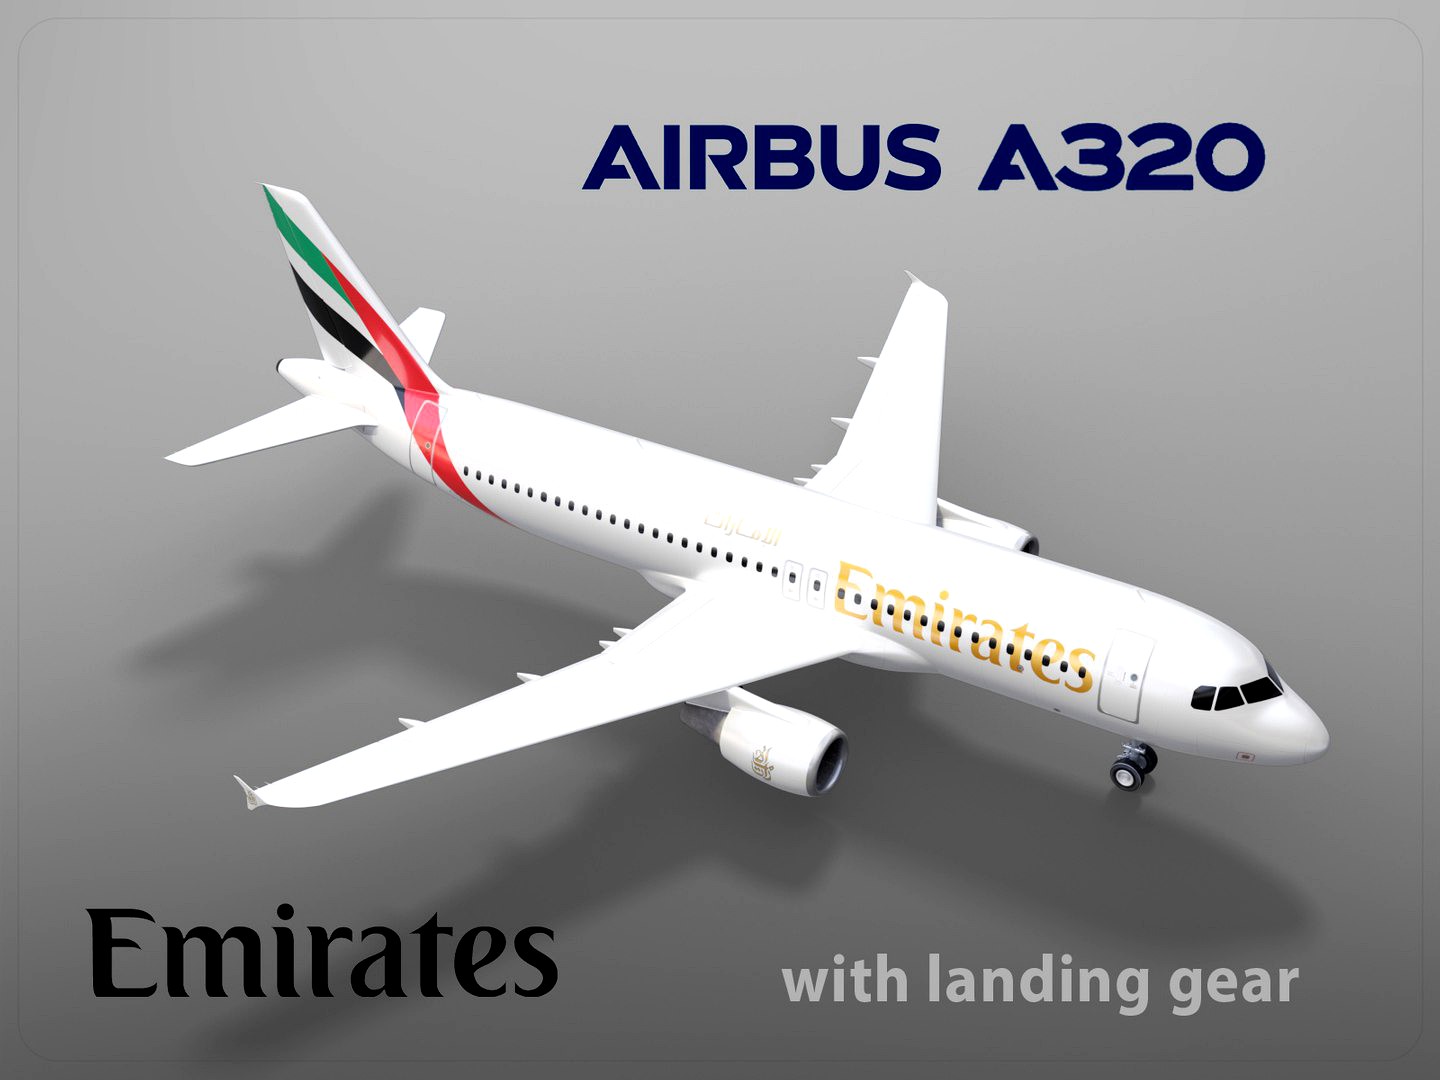 Airbus A320 Emirates with landing gear